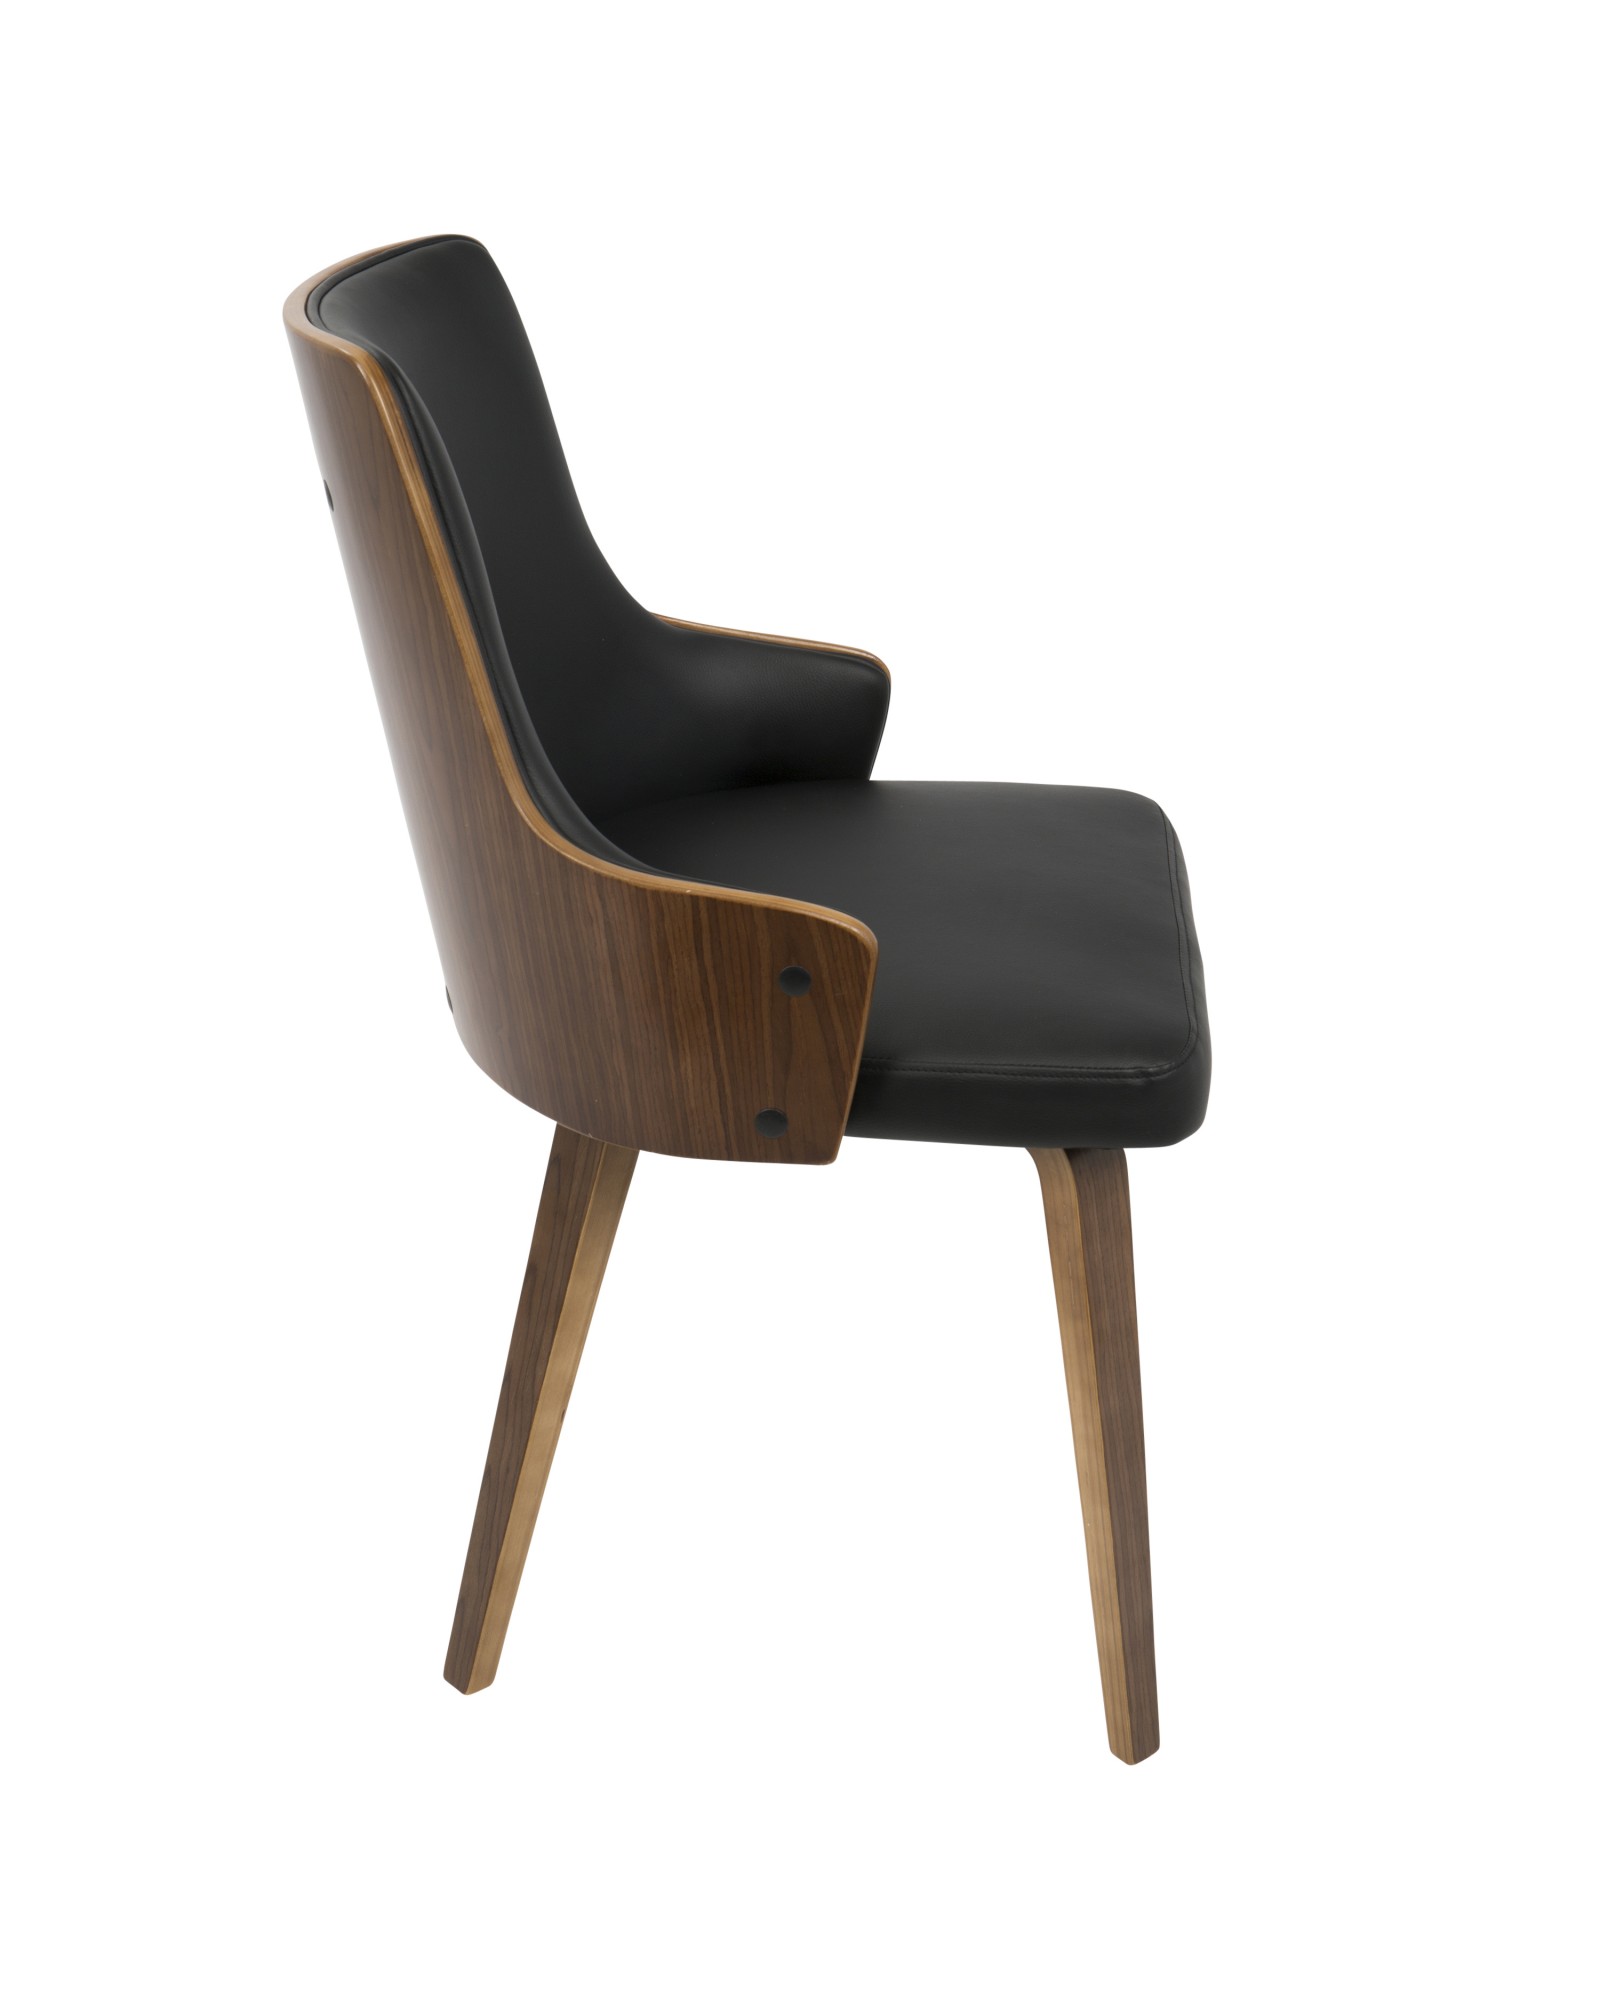 Stella Mid-Century Modern Dining/Accent Chair in Walnut with Black Faux Leather - Set of 2